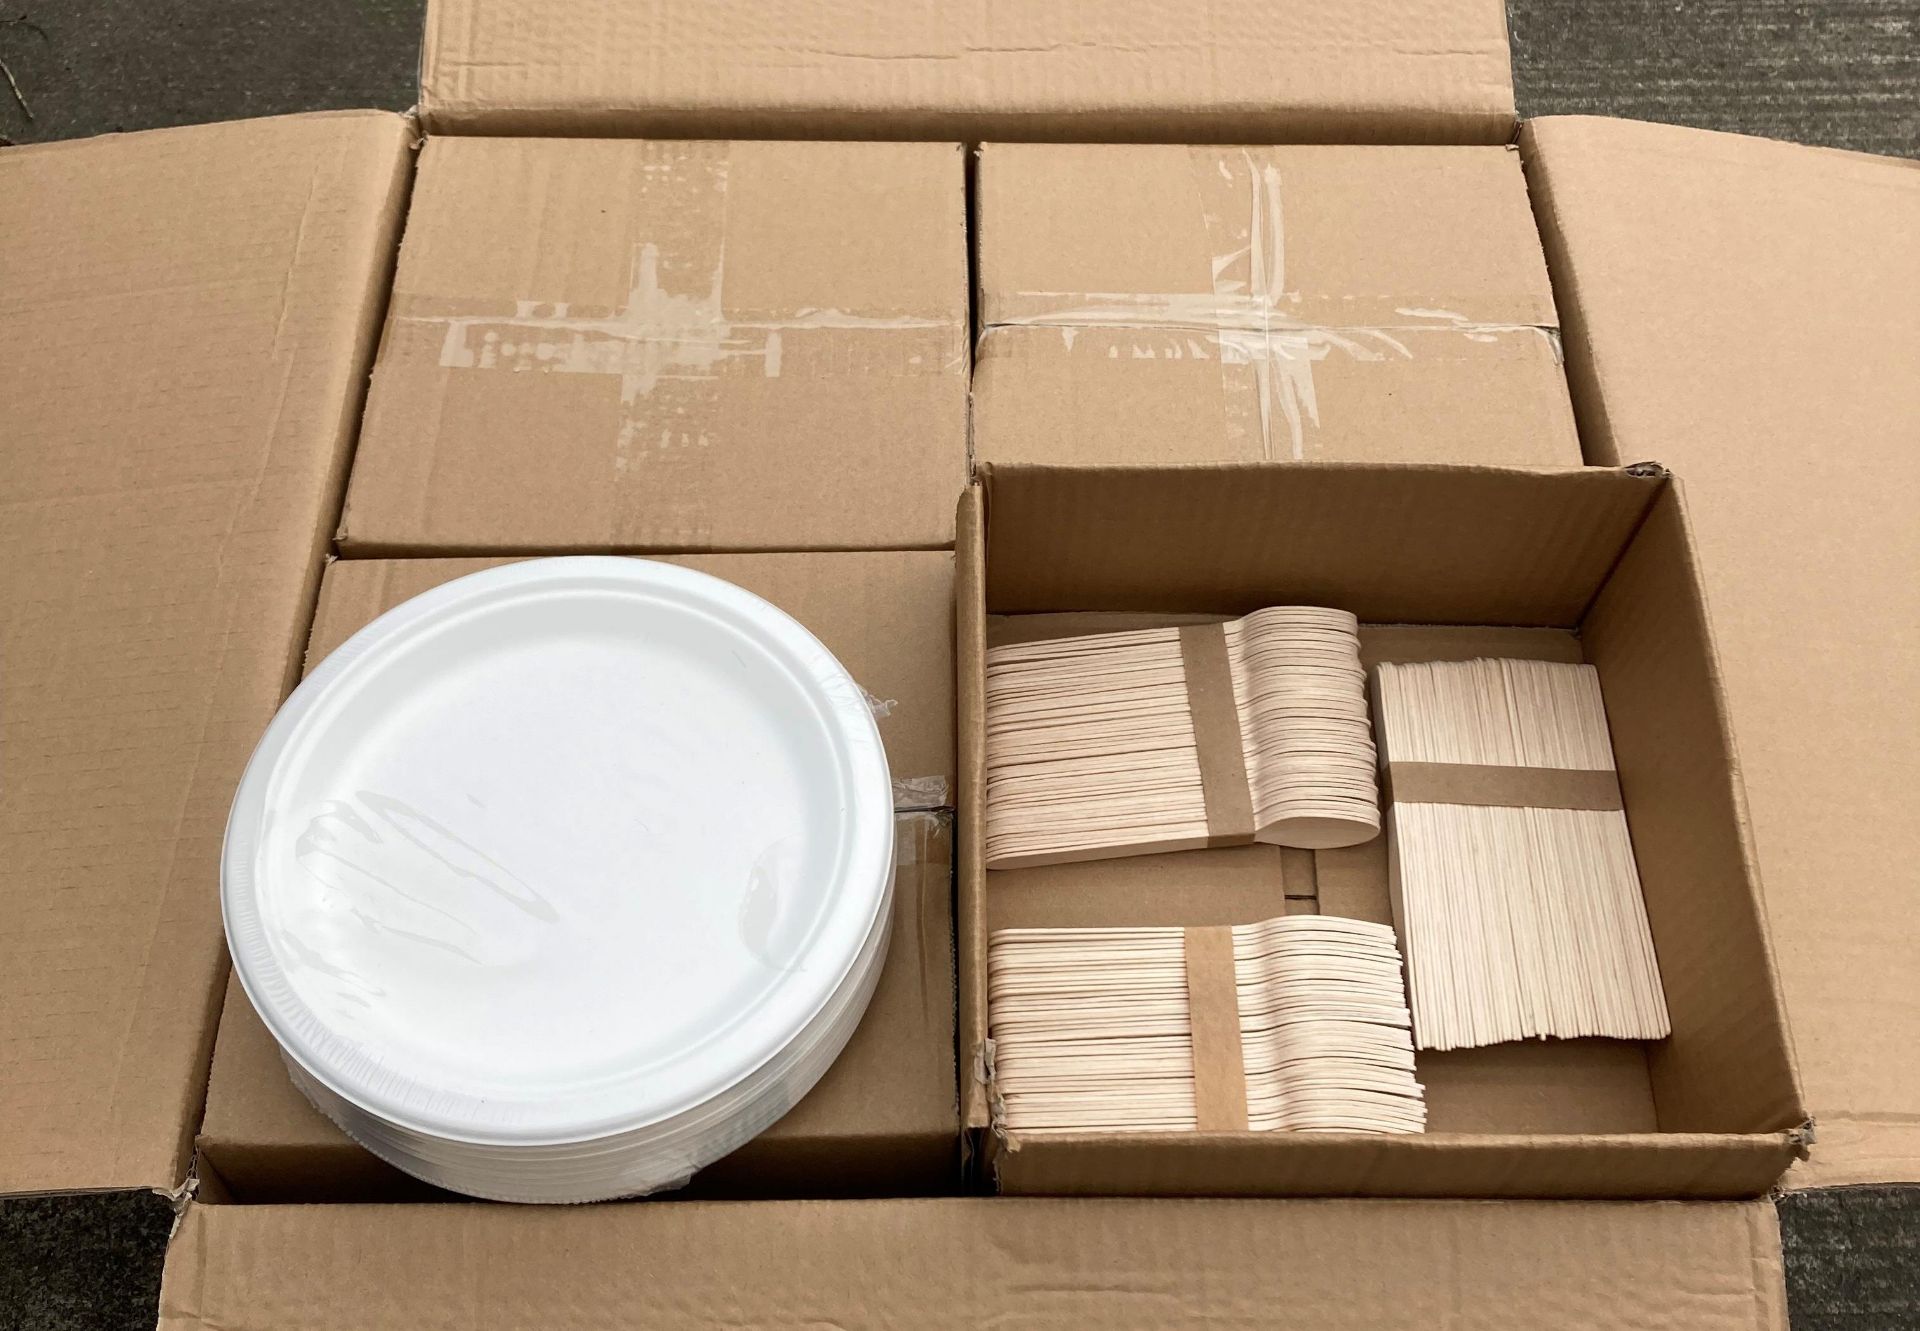 12 x Boxes of Wooden Cutlery and Paper Plates (1 x outer box) (saleroom location: Container 9)